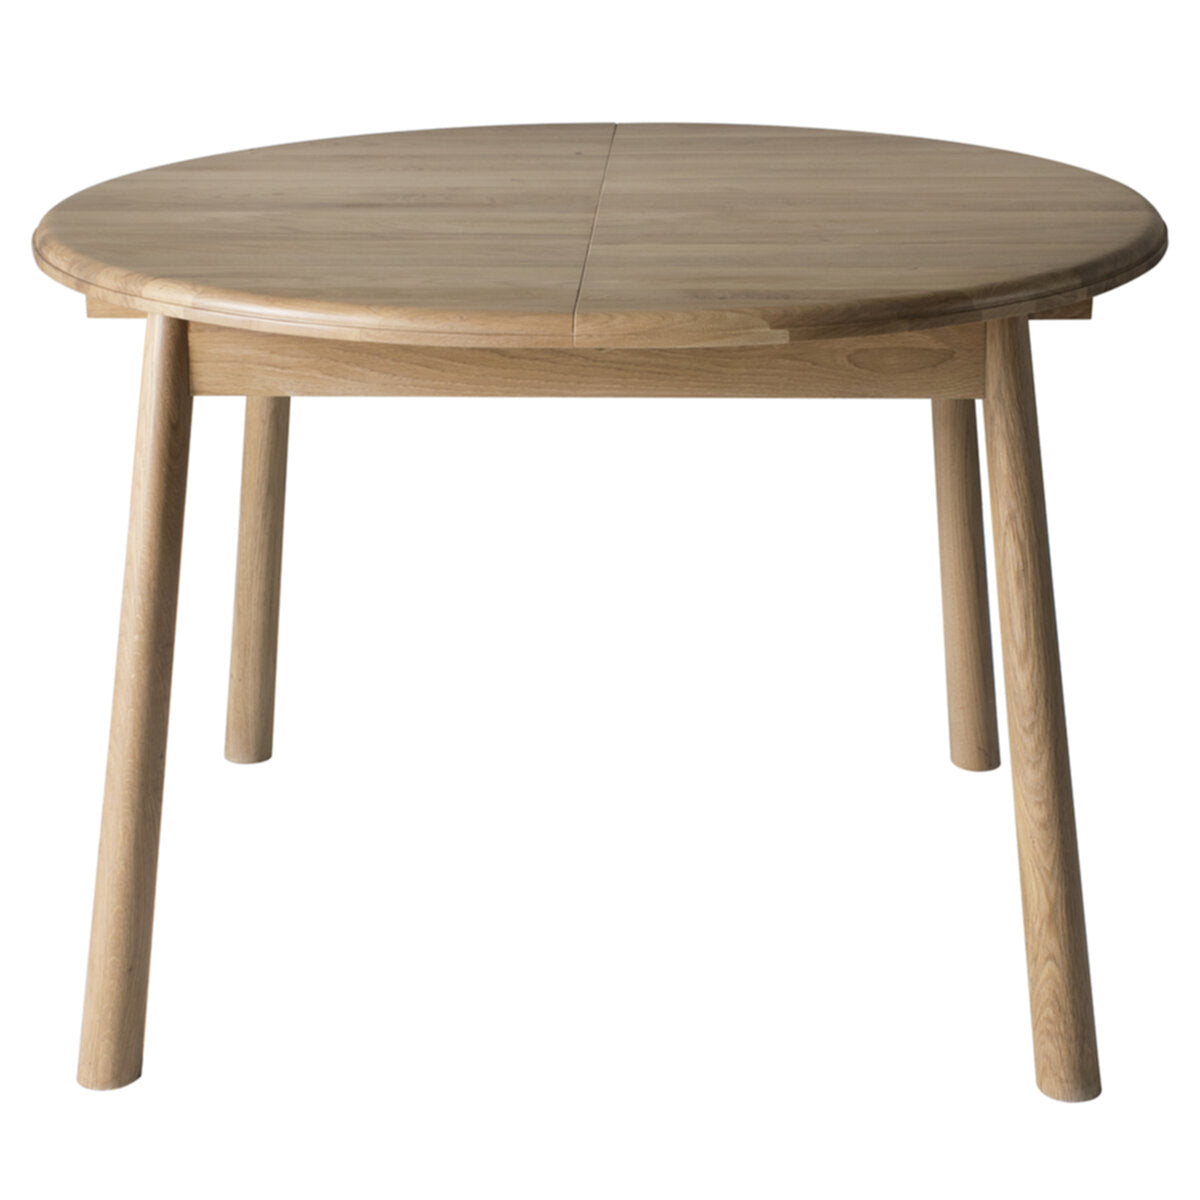 Emiko Metal And Wood Round Extending Table 